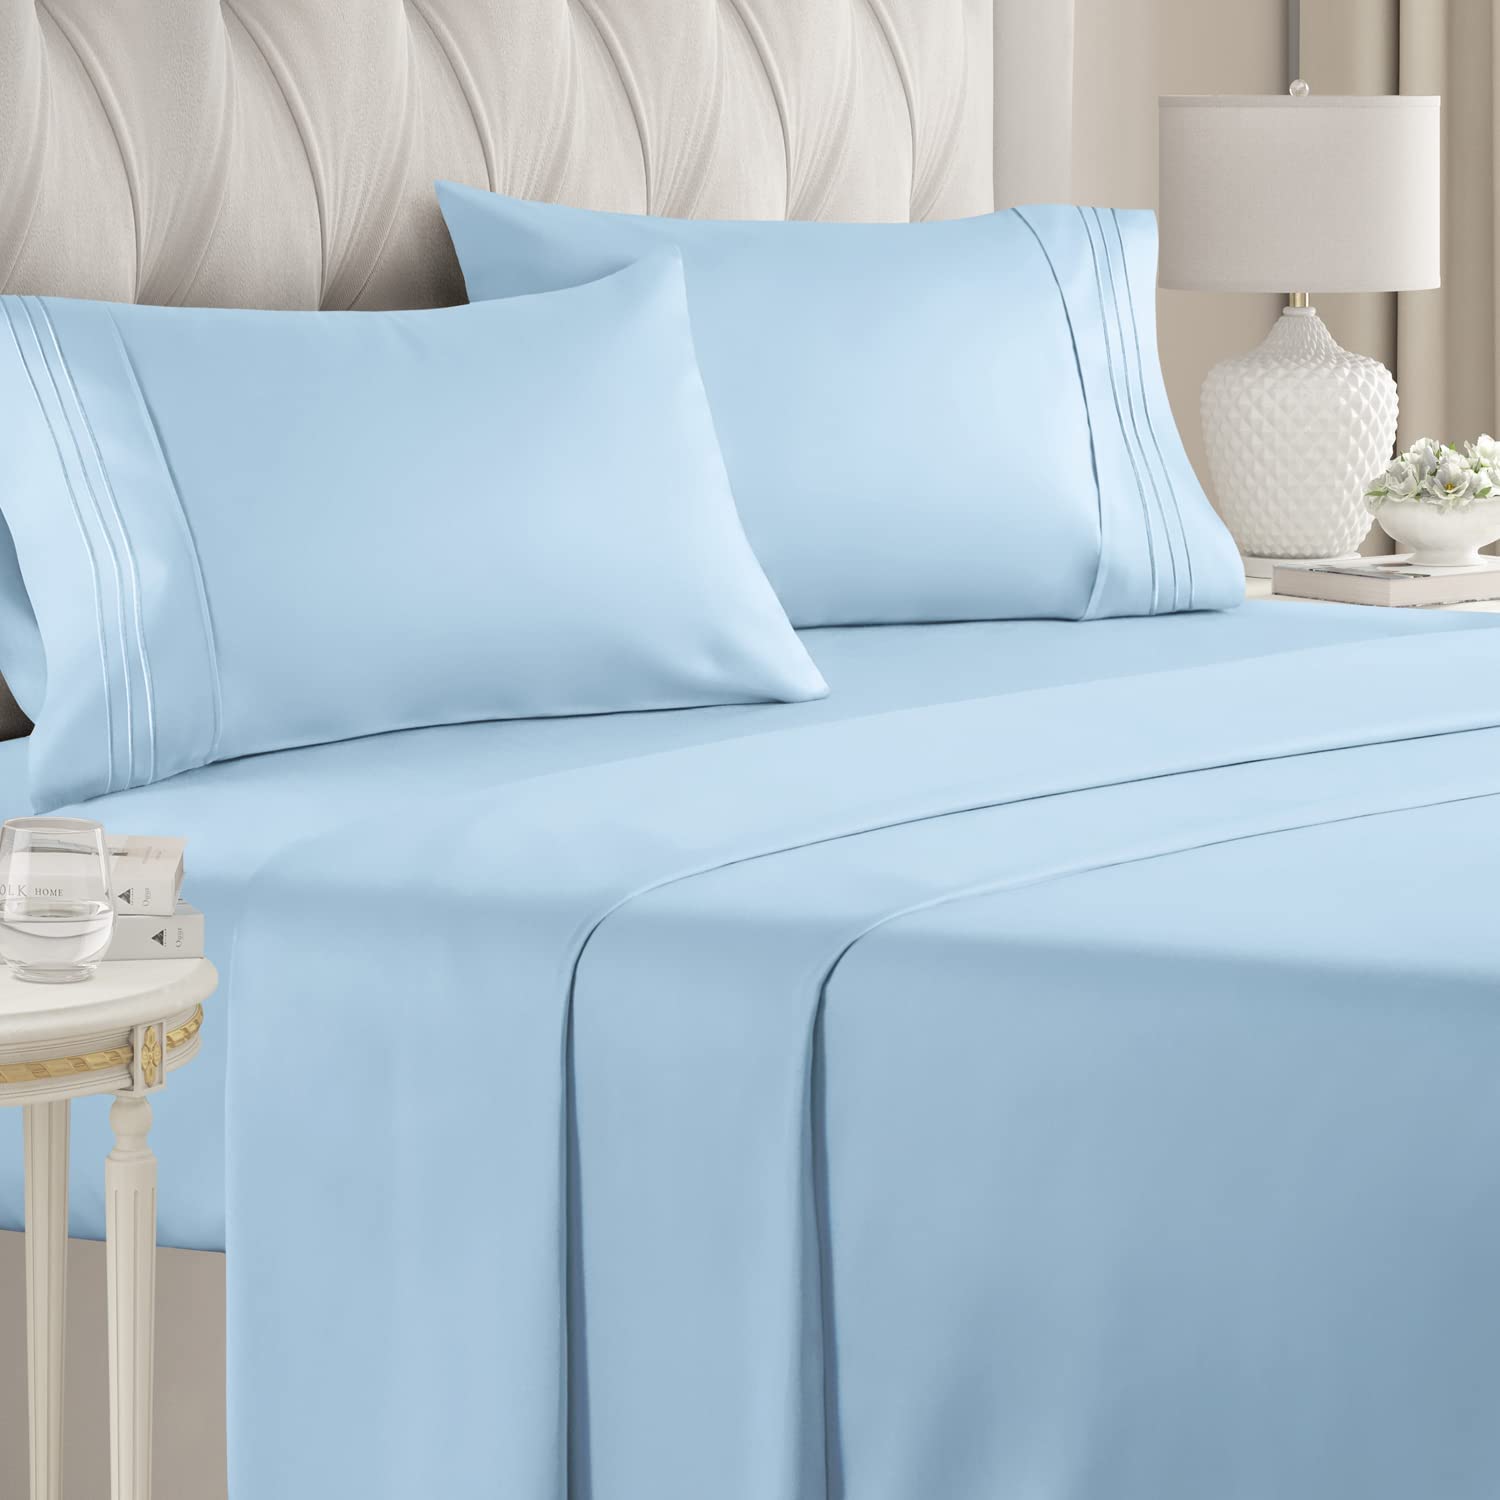 Buy Calking Size Flat Sheet Blue Egyptian Cotton 1000 Thread Count at- Egyptianhomelinens.com